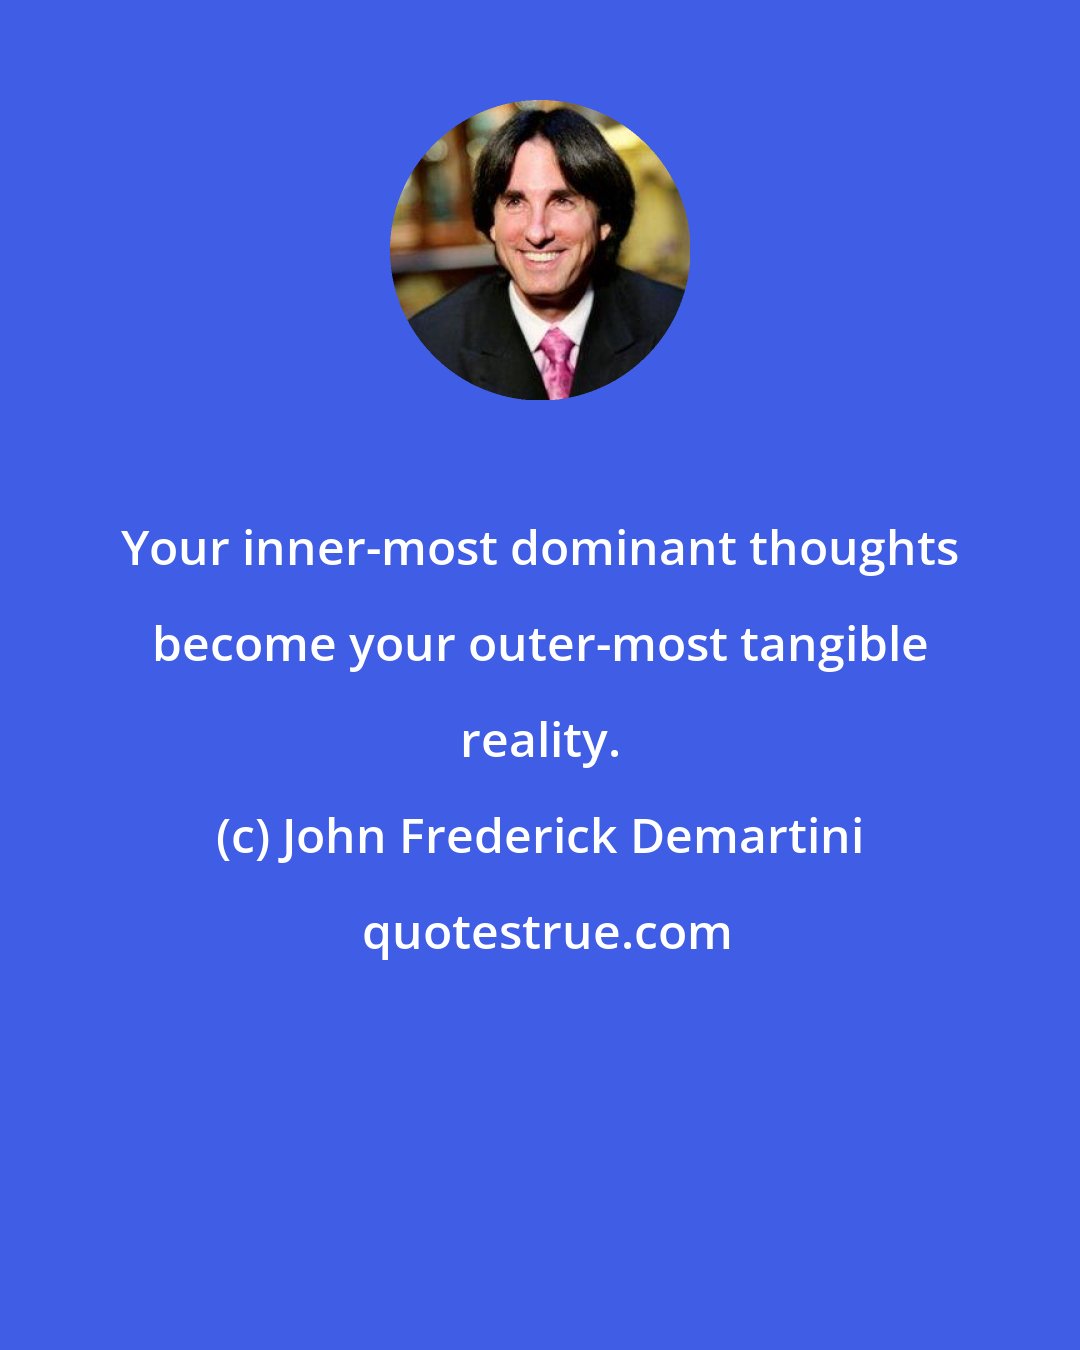 John Frederick Demartini: Your inner-most dominant thoughts become your outer-most tangible reality.